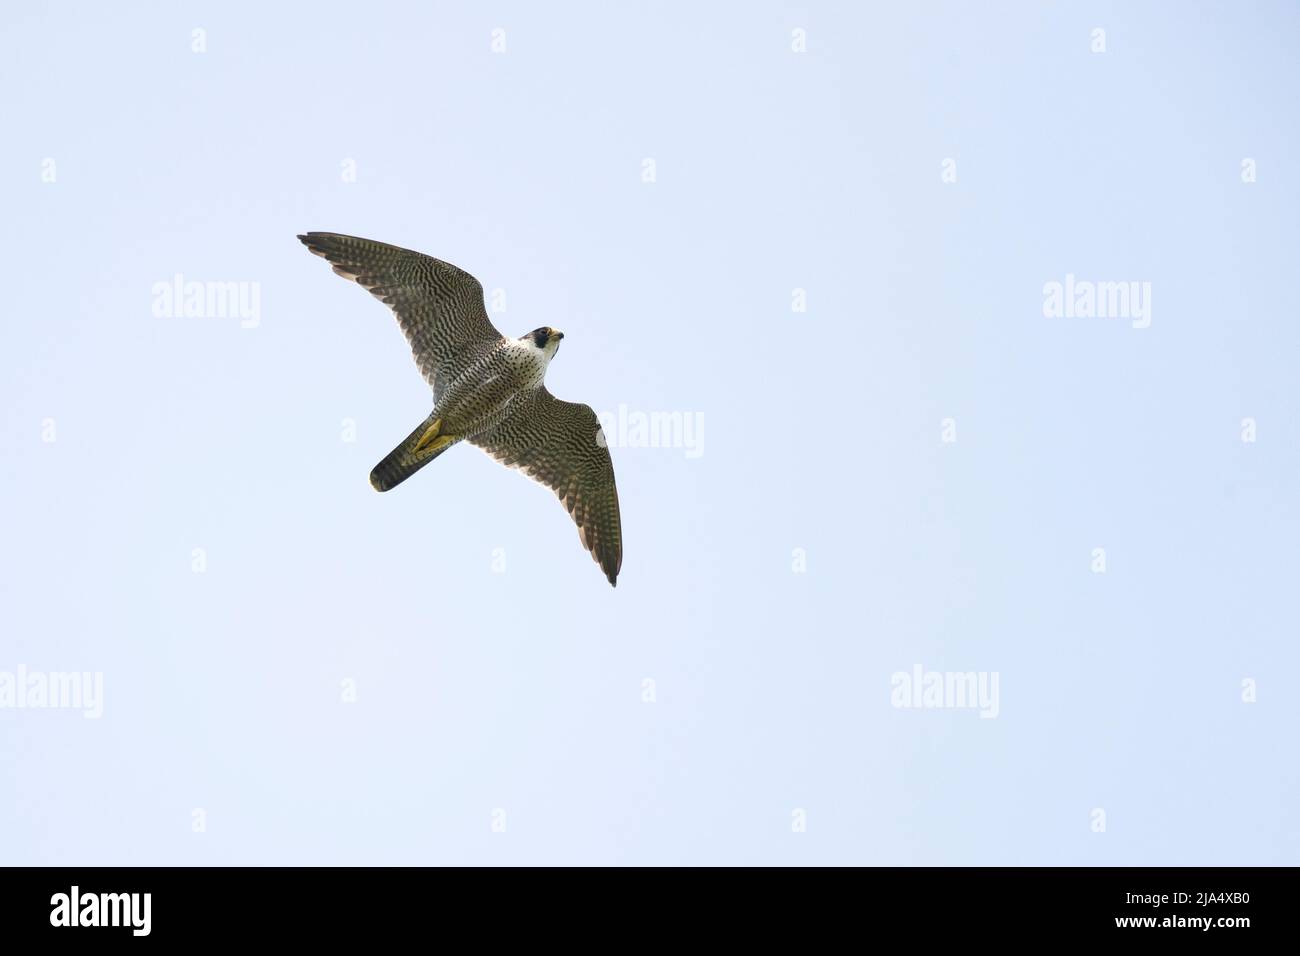 An adult Peregrine falcon (Falco peregrinus) flying in the sky. Stock Photo